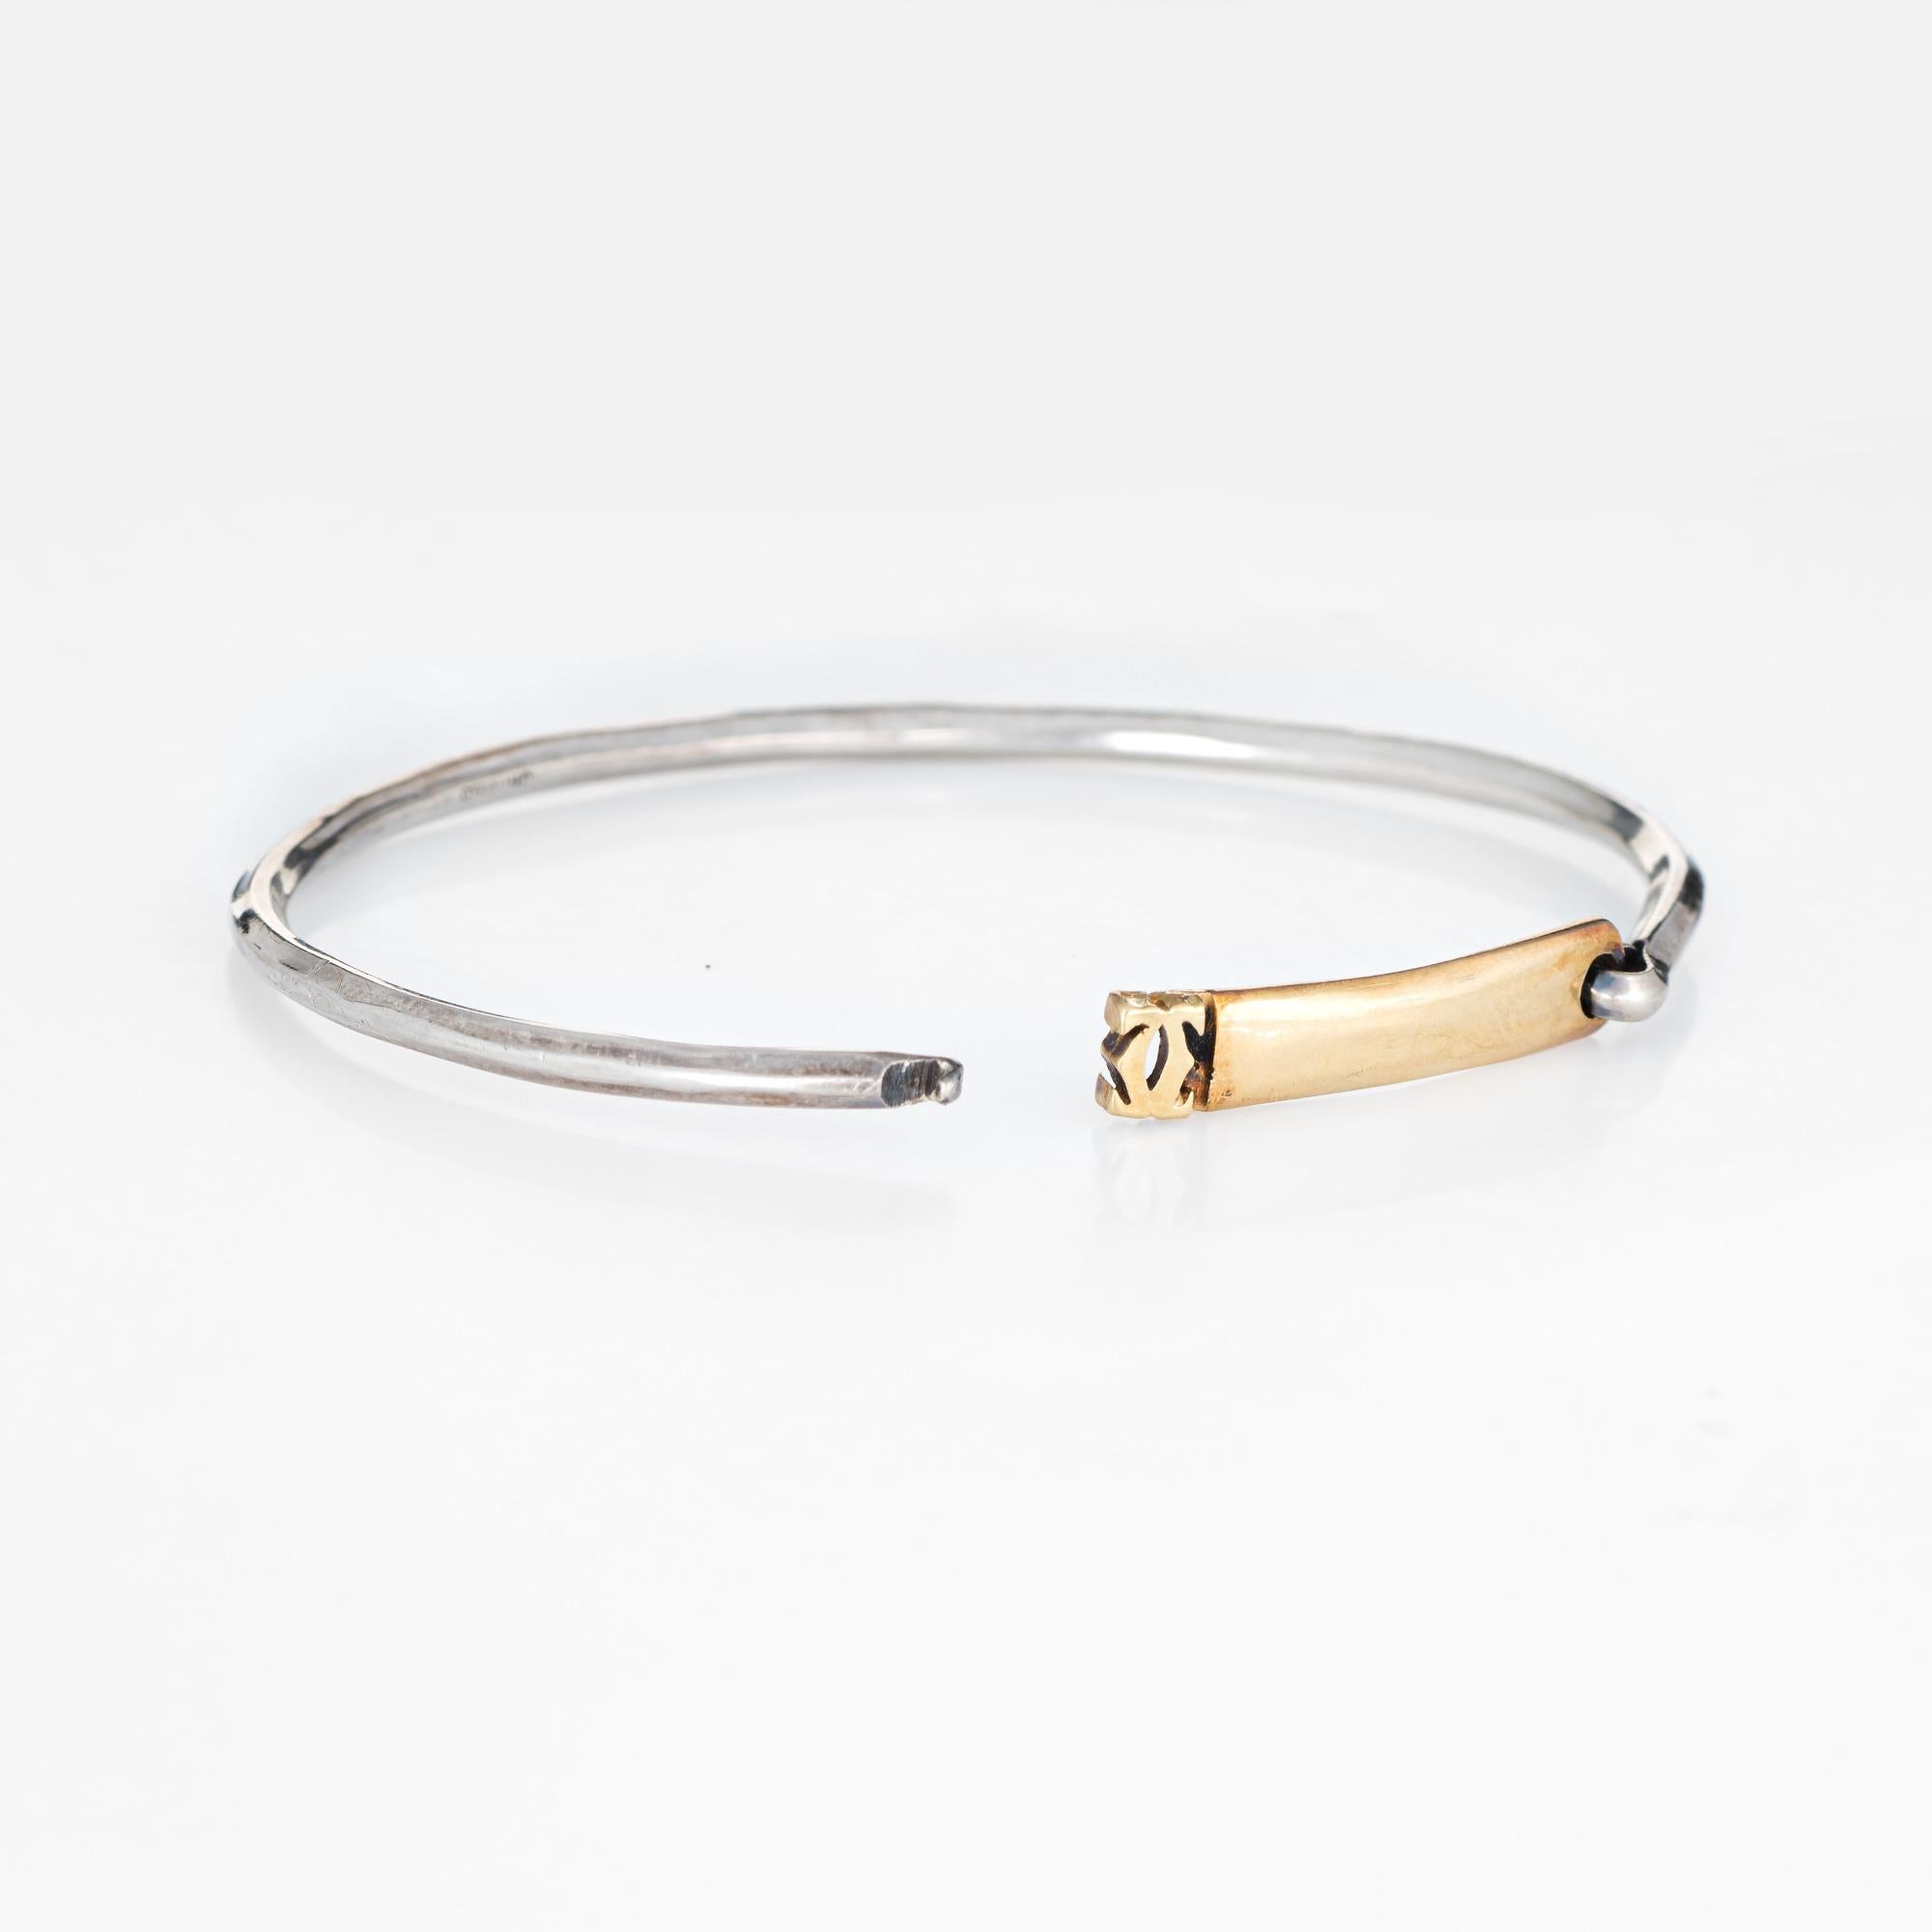 Vintage Cartier bangle bracelet crafted in sterling silver & 18 karat yellow gold (circa 1960s).  

The stylish bracelet features a 18k yellow gold bar that clips on and off to the sterling silver base. A great piece to wear alone or layer with your